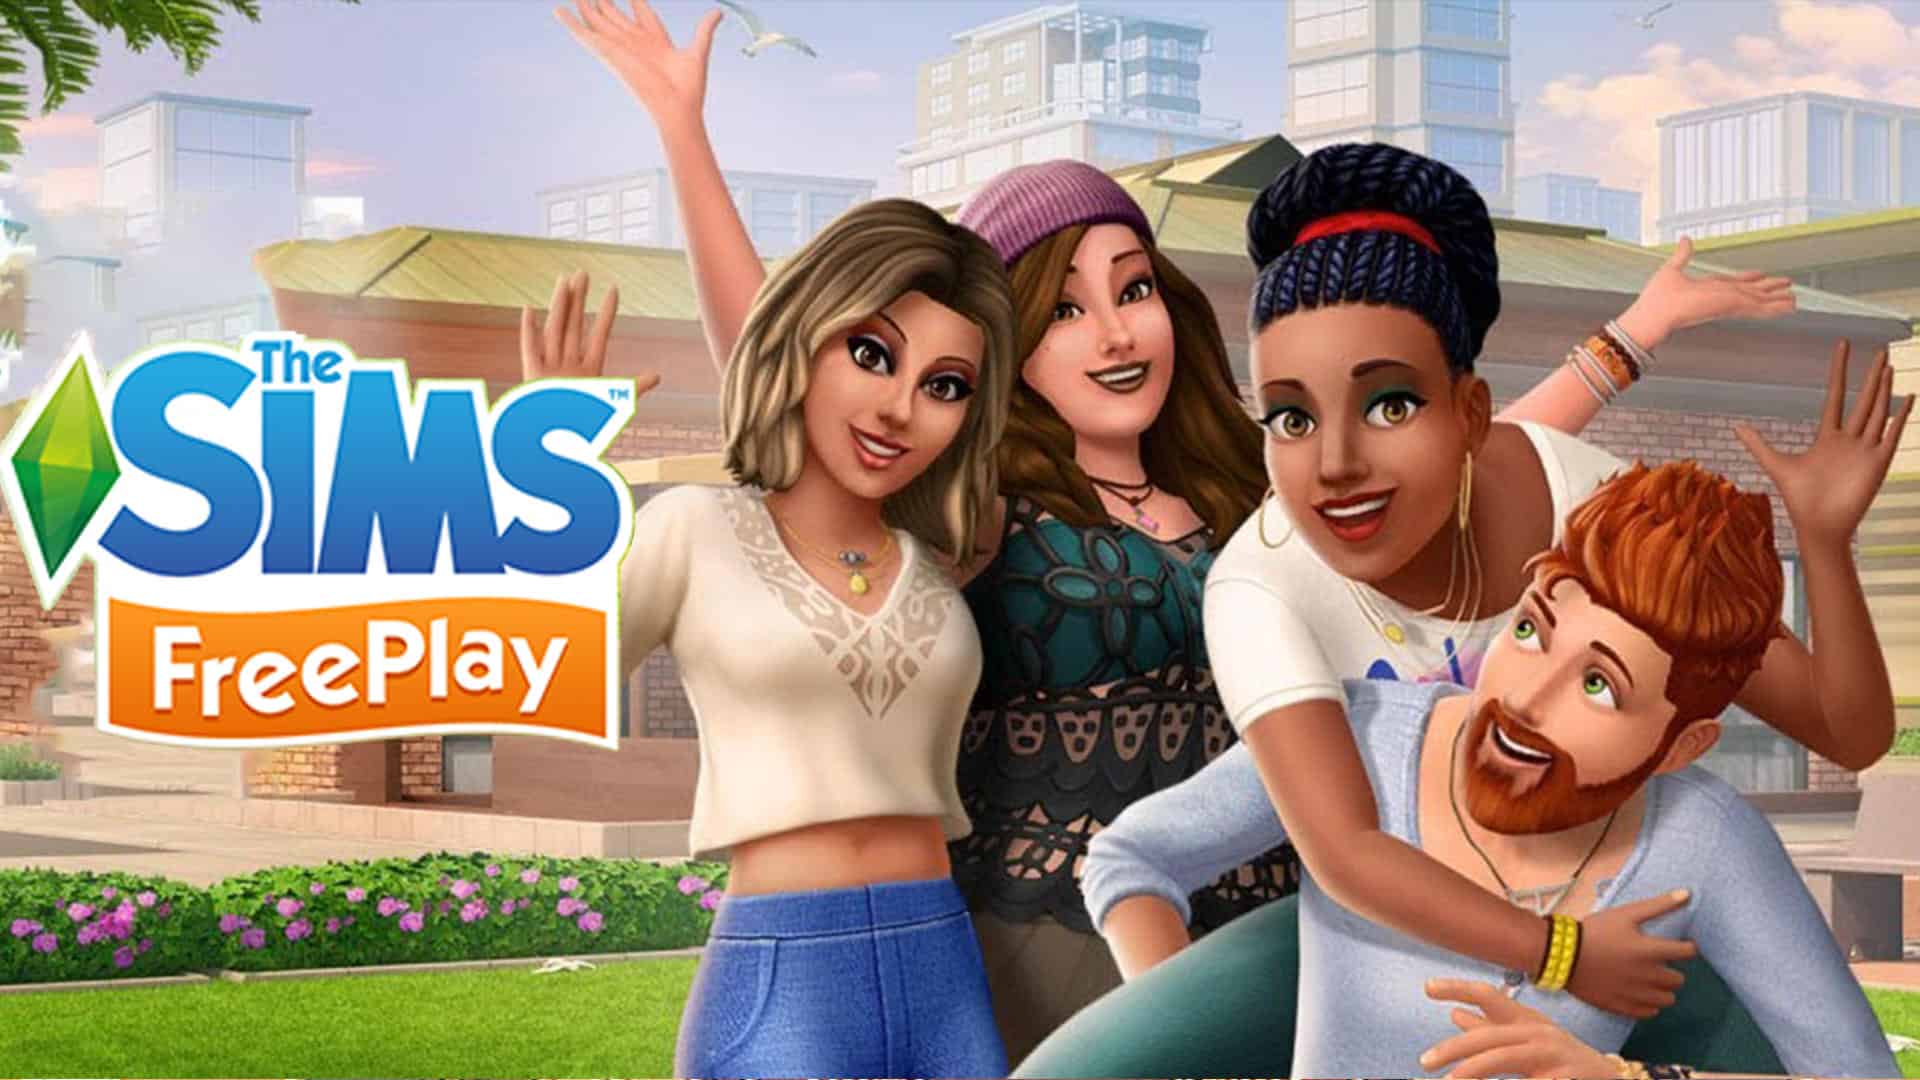 New free-to-play Sims game The Sims FreePlay to launch on iOS next month